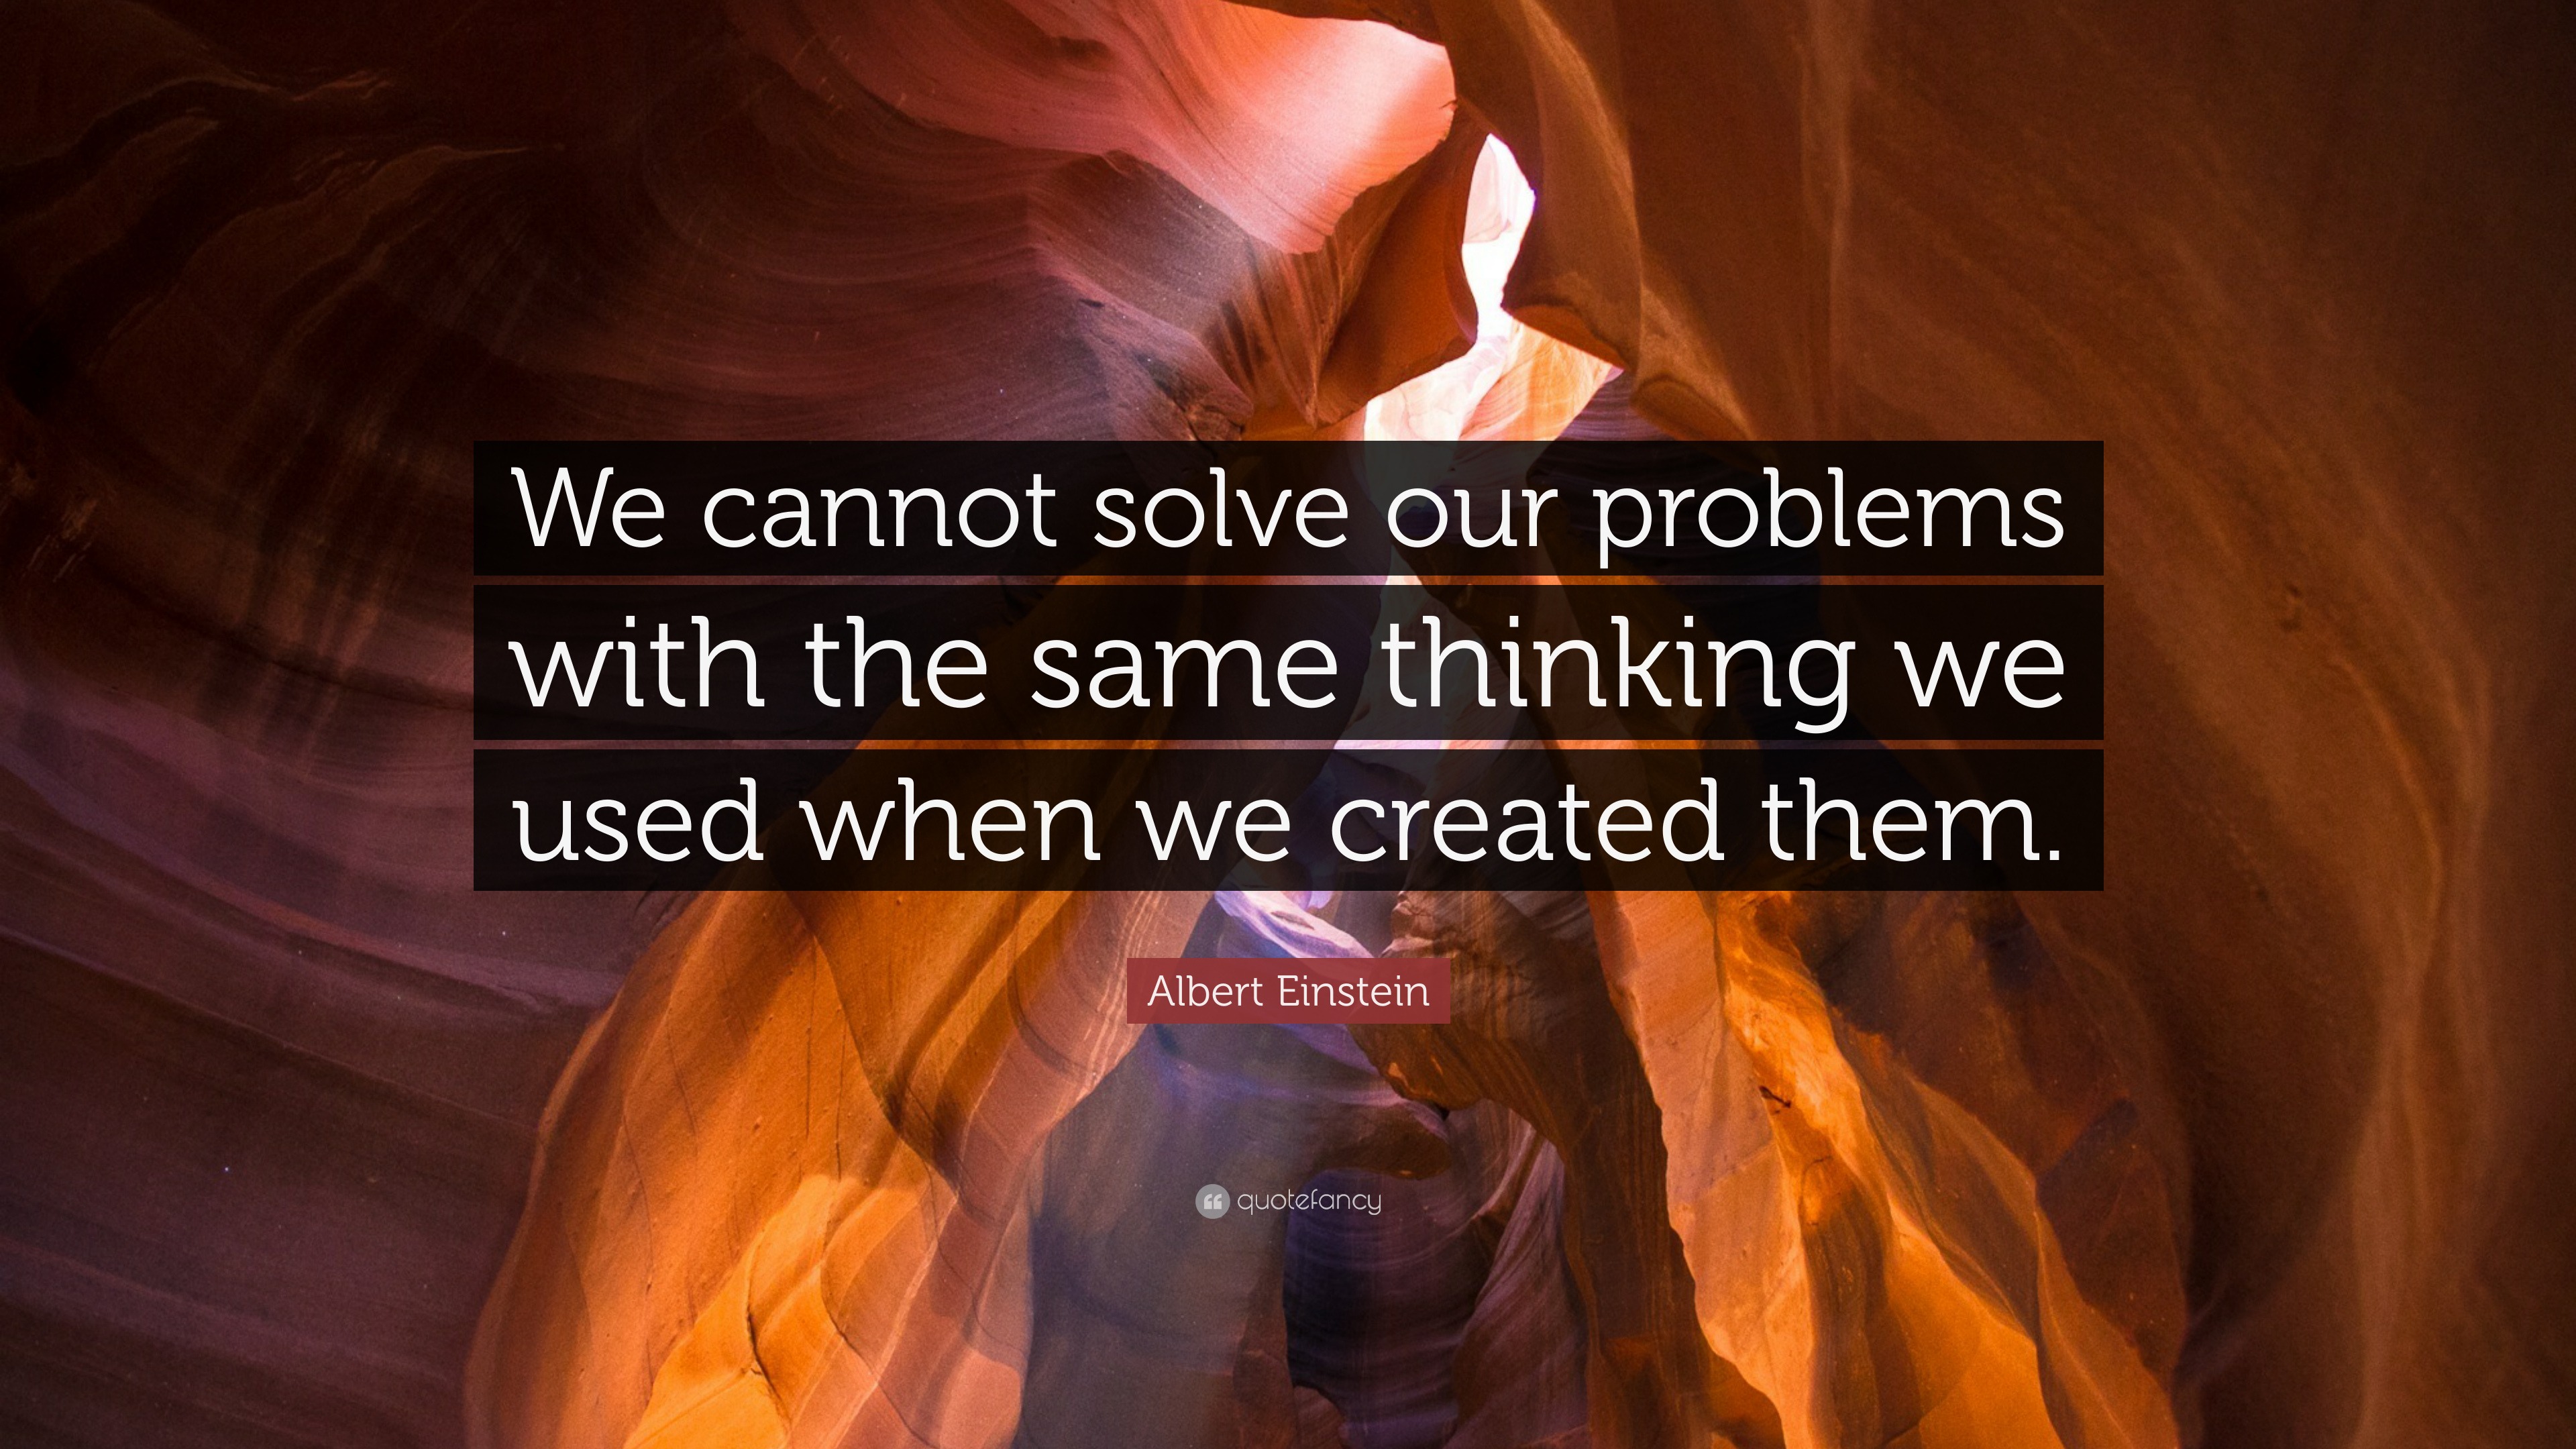 Albert Einstein Quote: “We cannot solve our problems with the same